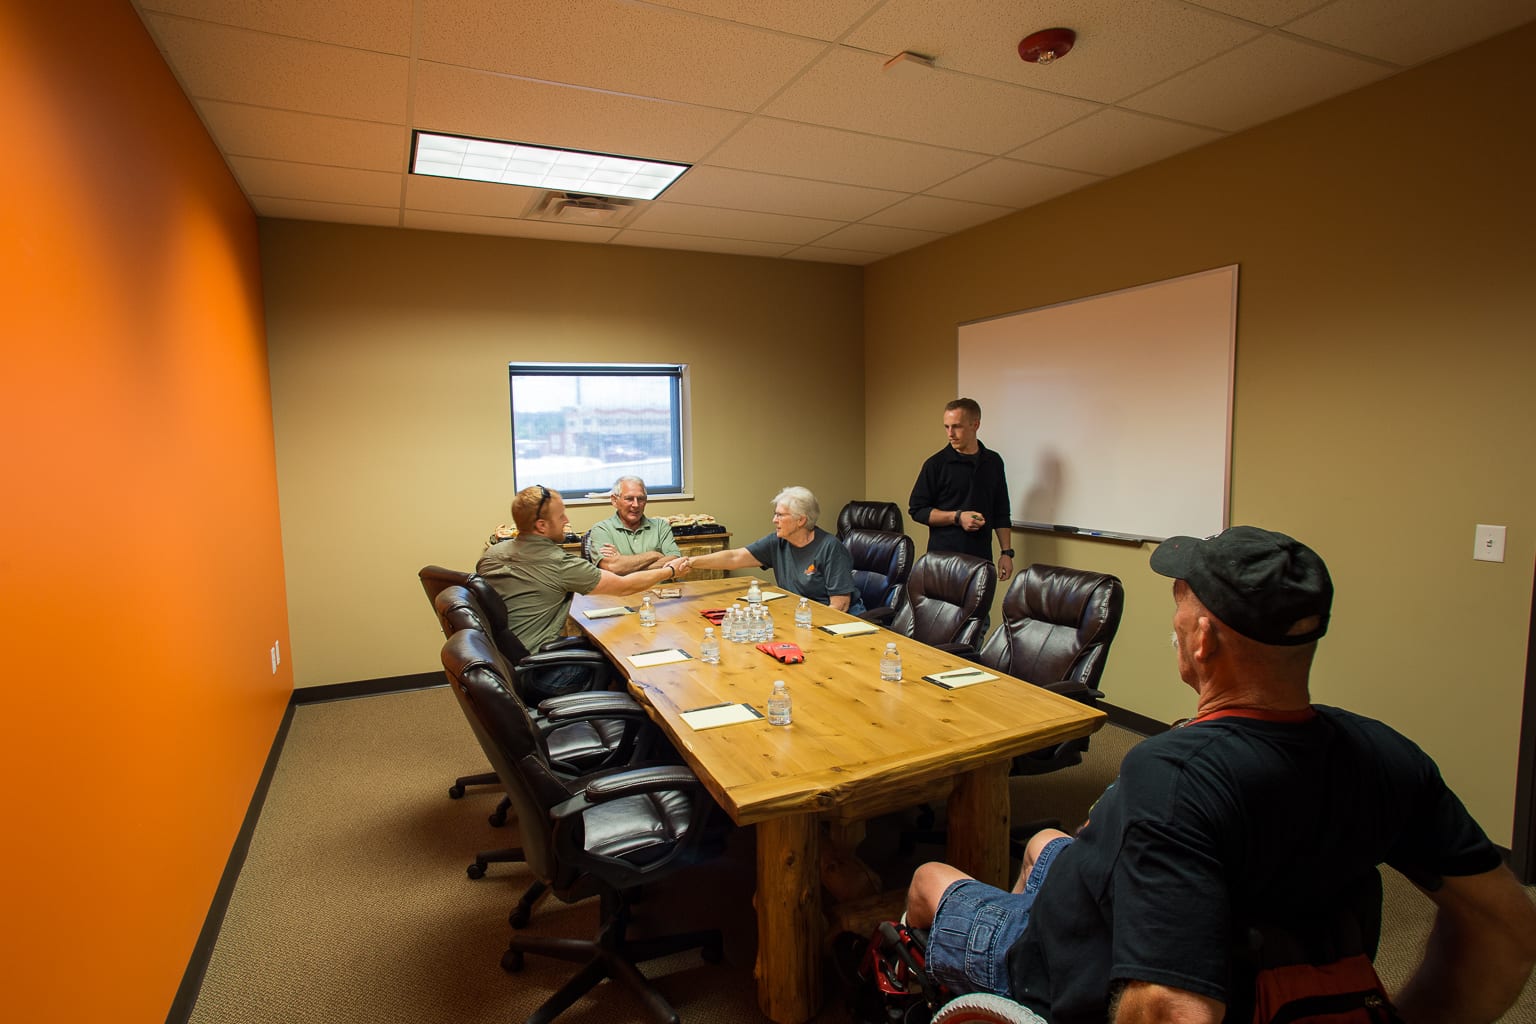 Corporate Meetings and Team Building - Bristlecone Shooting Range, Firearms Training & Retail Center Denver, CO